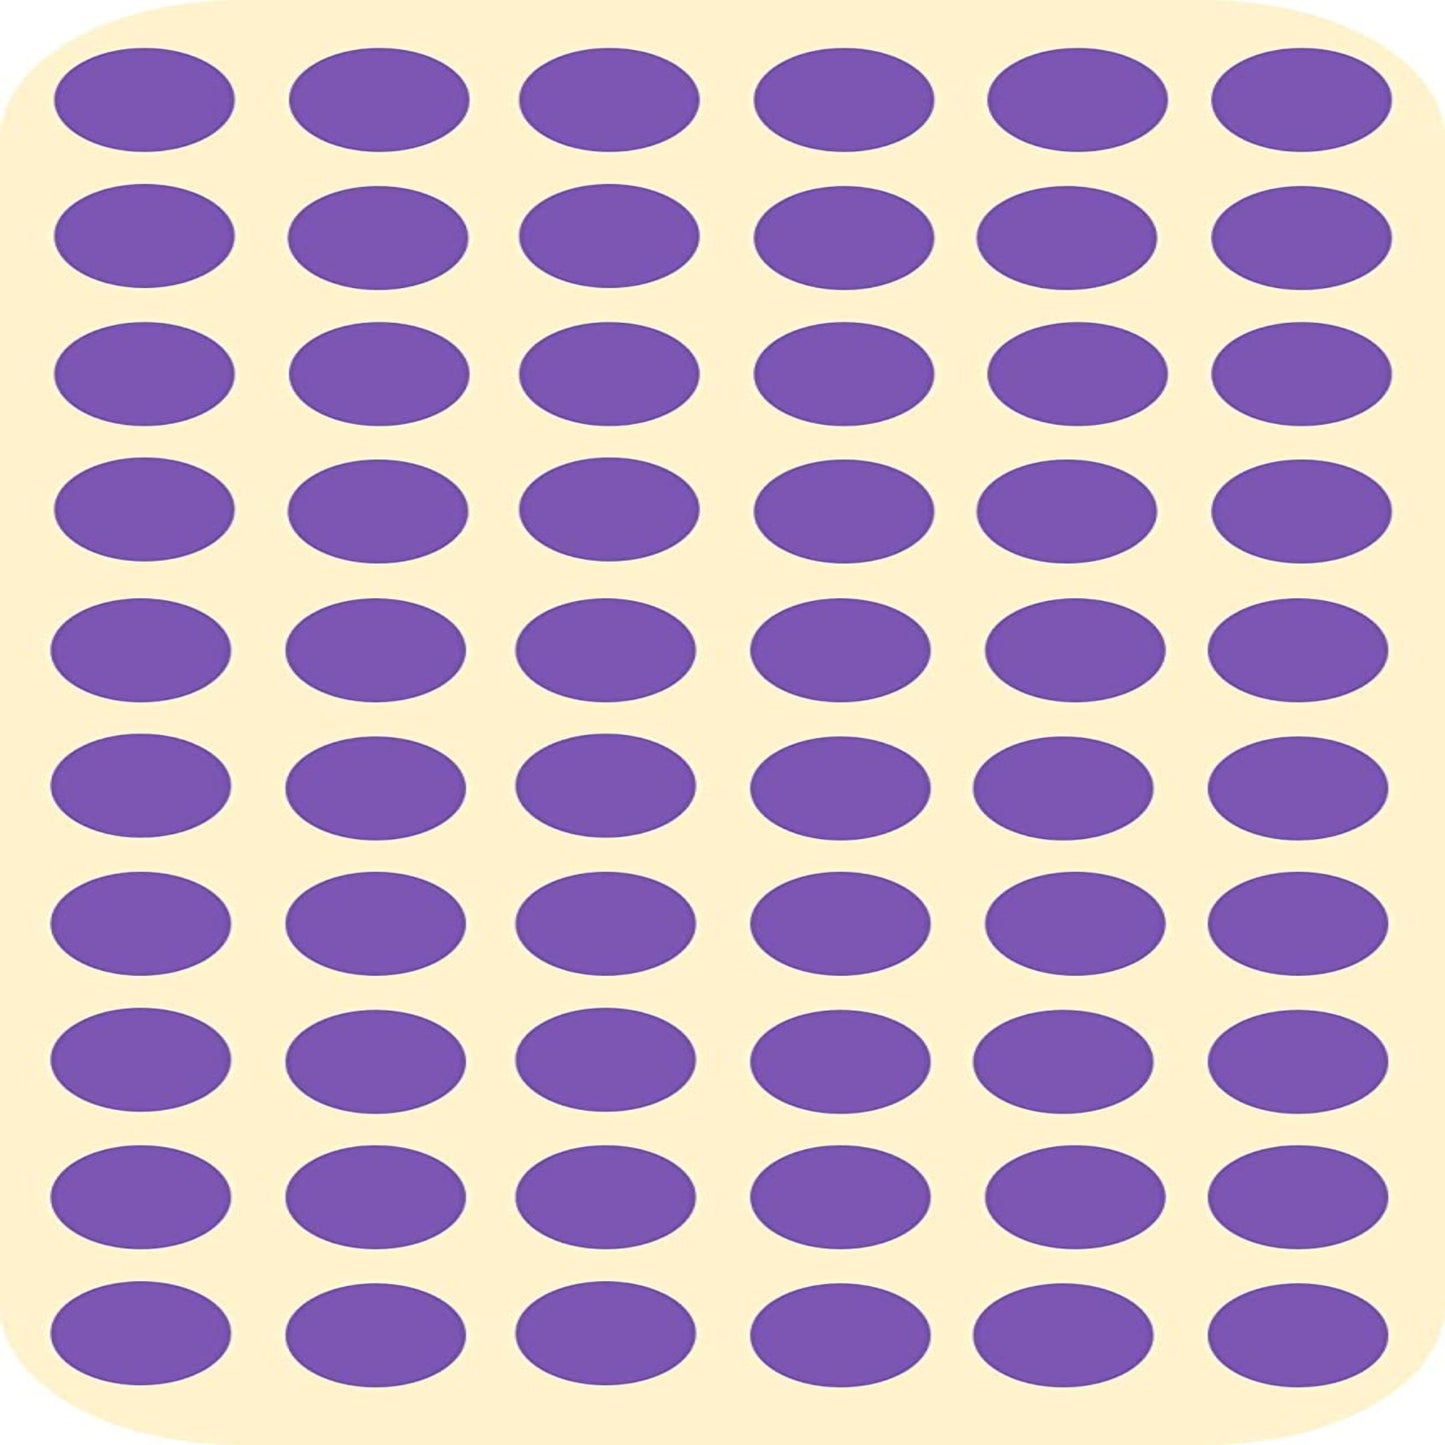 AccuPrints Purple Coloured Round Dots 10-mm or 1 cm or 0.37 inch Stickers for Art and Craft & Games